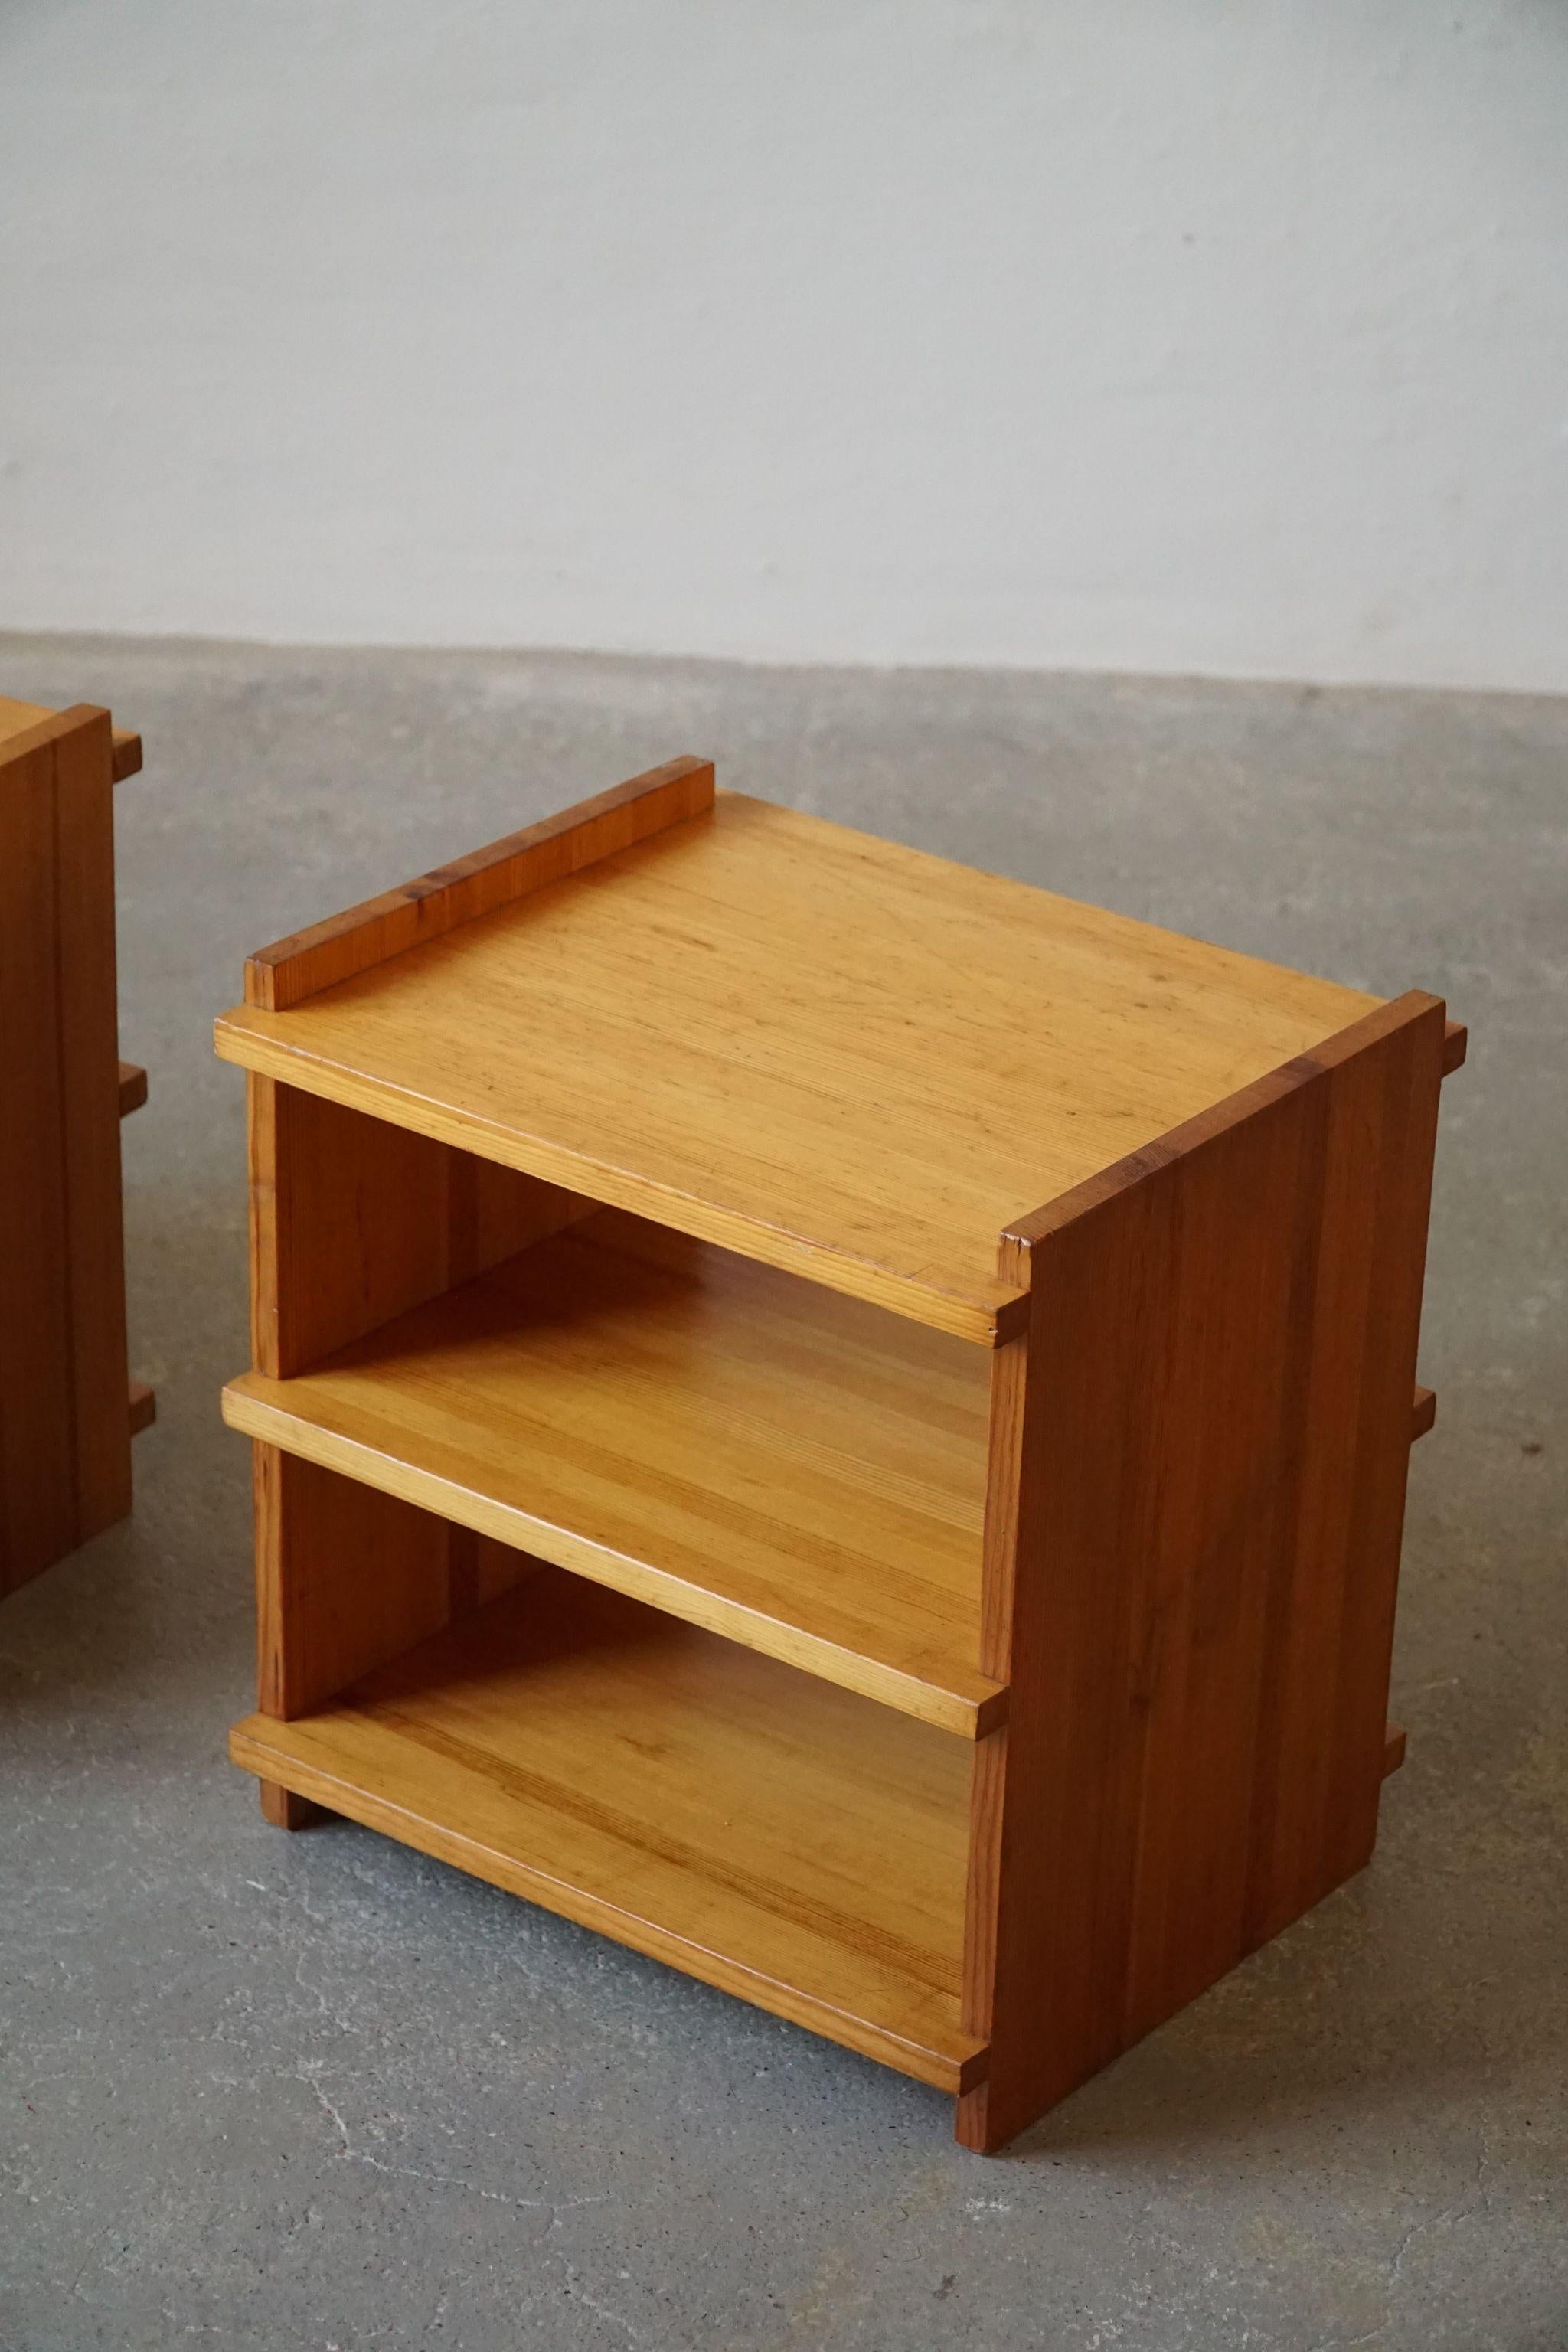 A pair of Scandinavian night stands / side tables in solid pine, made in Denmark, ca 1970s by a unknown cabinetmaker.

The night stands are nicely patinated and in a good vintage condition.

A fine brutalist object with a warm colour and patina